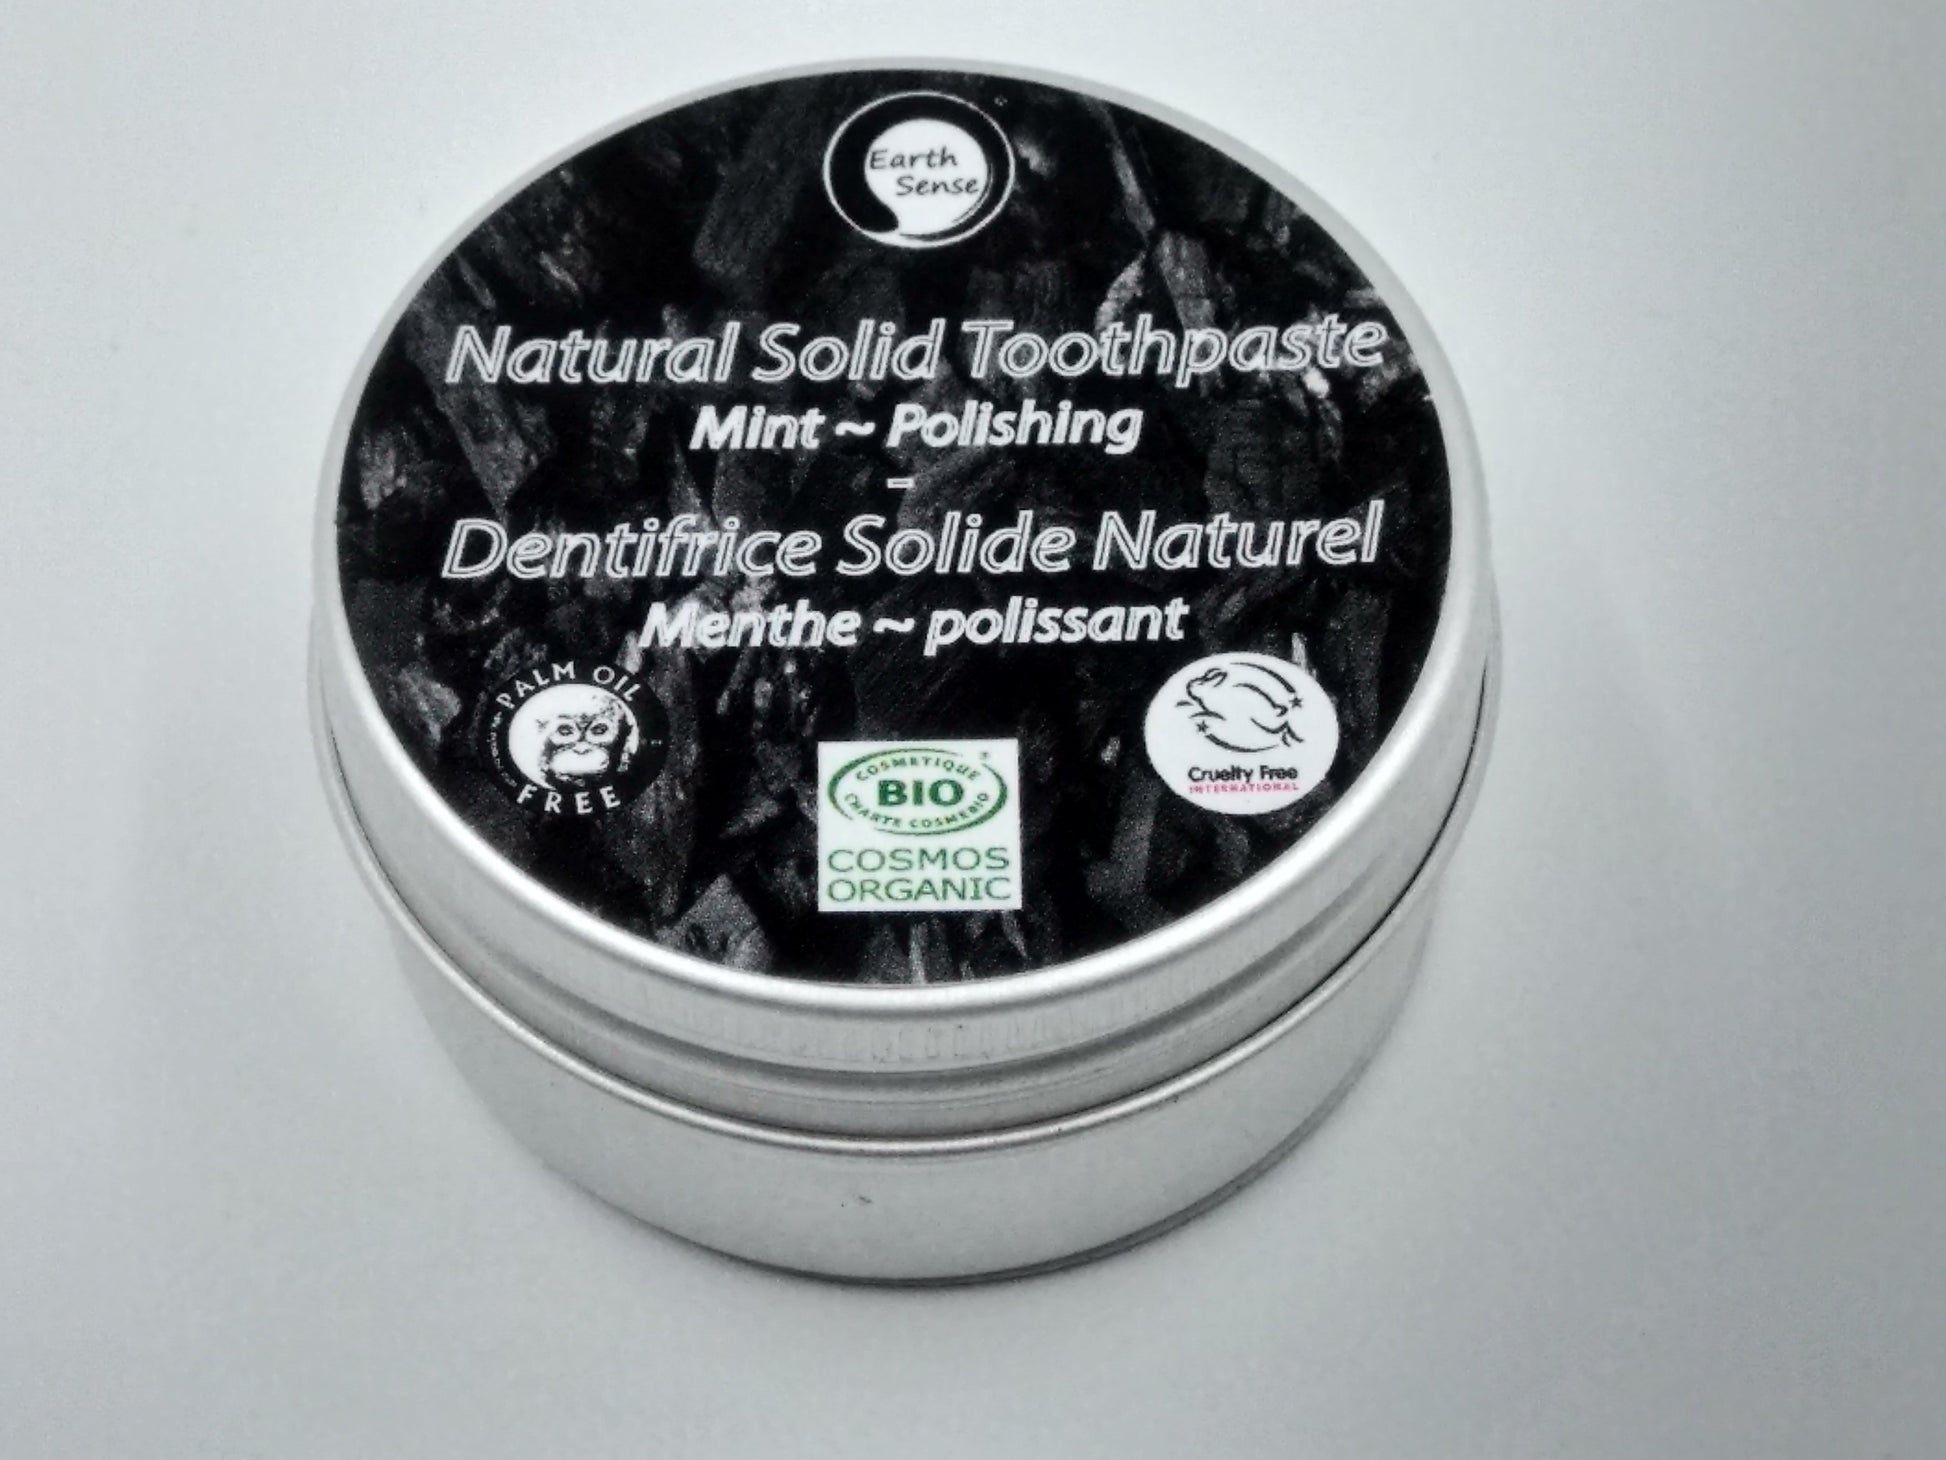 Natural Organic Certified Solid Toothpaste Gift Set - Earthsenseorganics